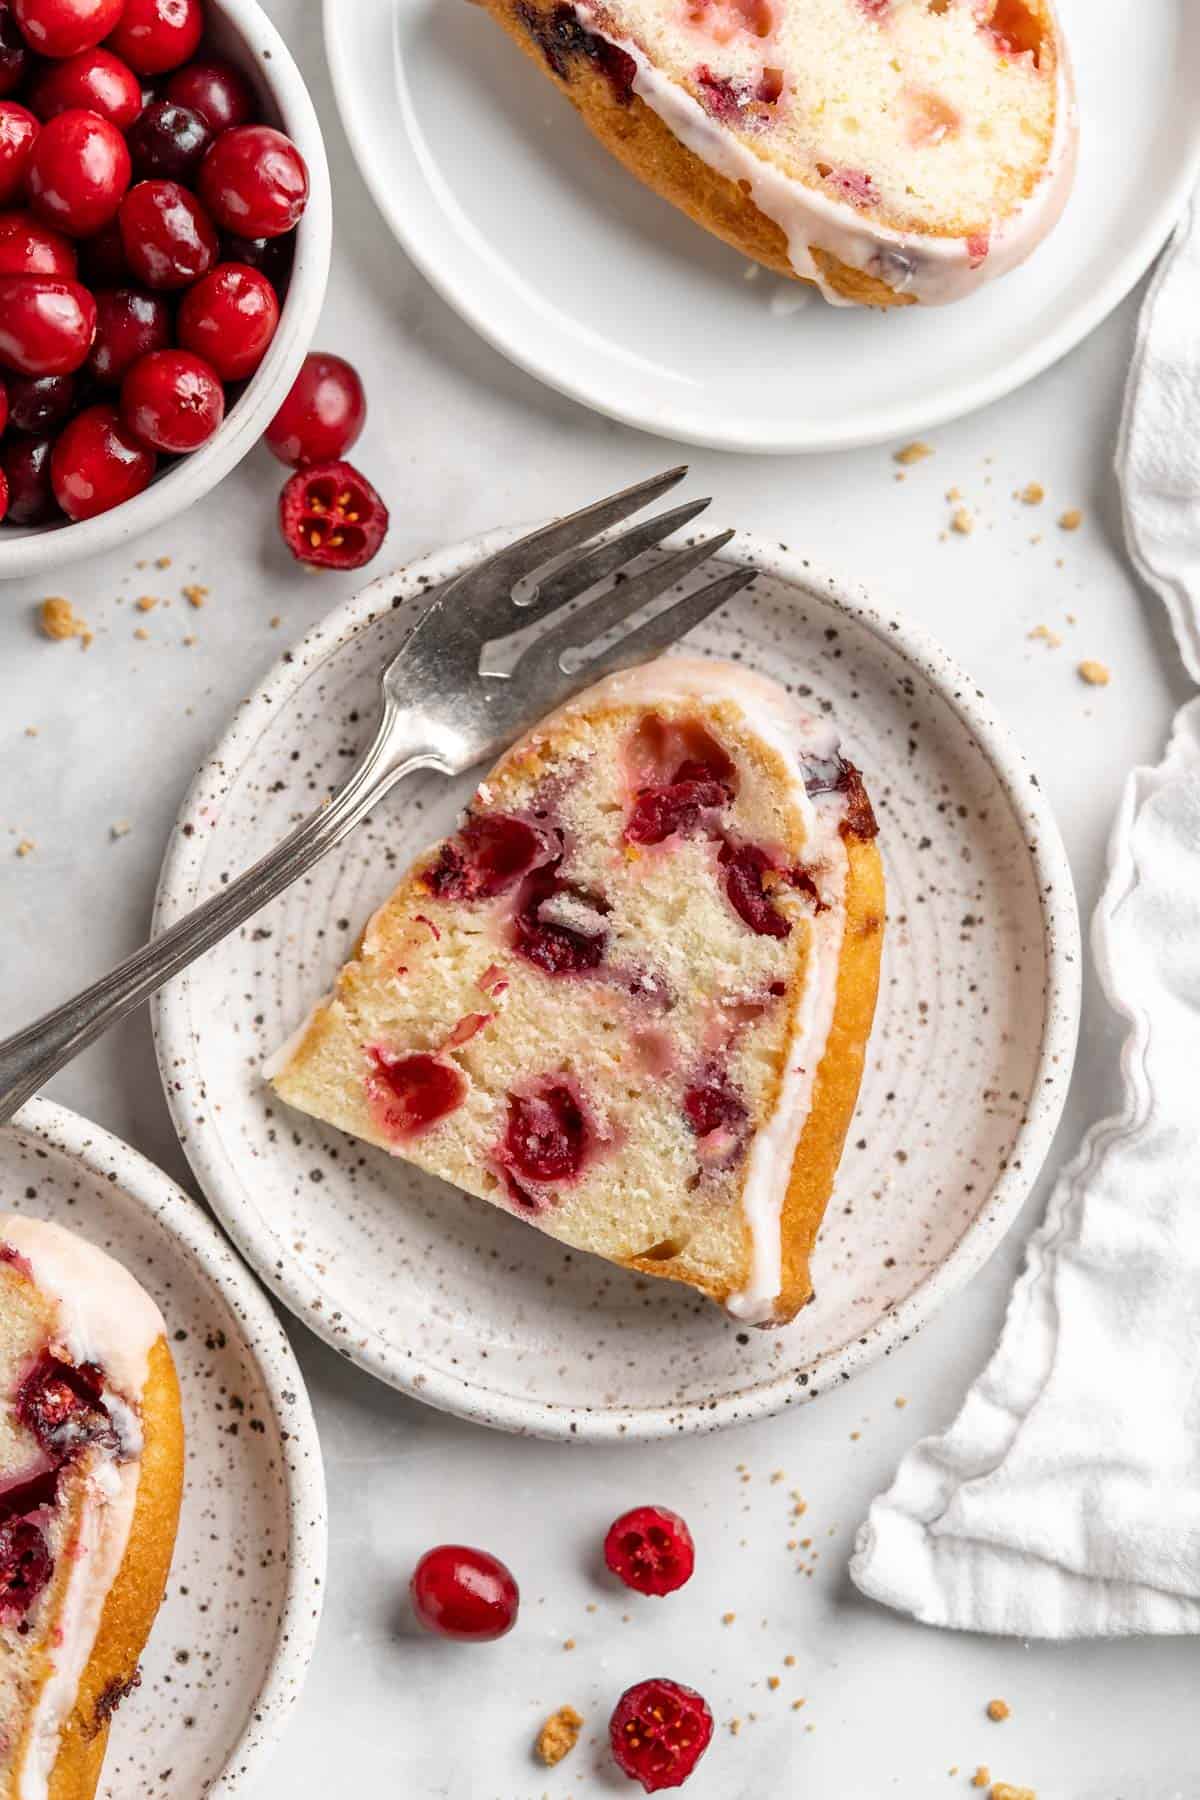 Plates of cranberry orange cake on the table with a bowl of berries on the table.